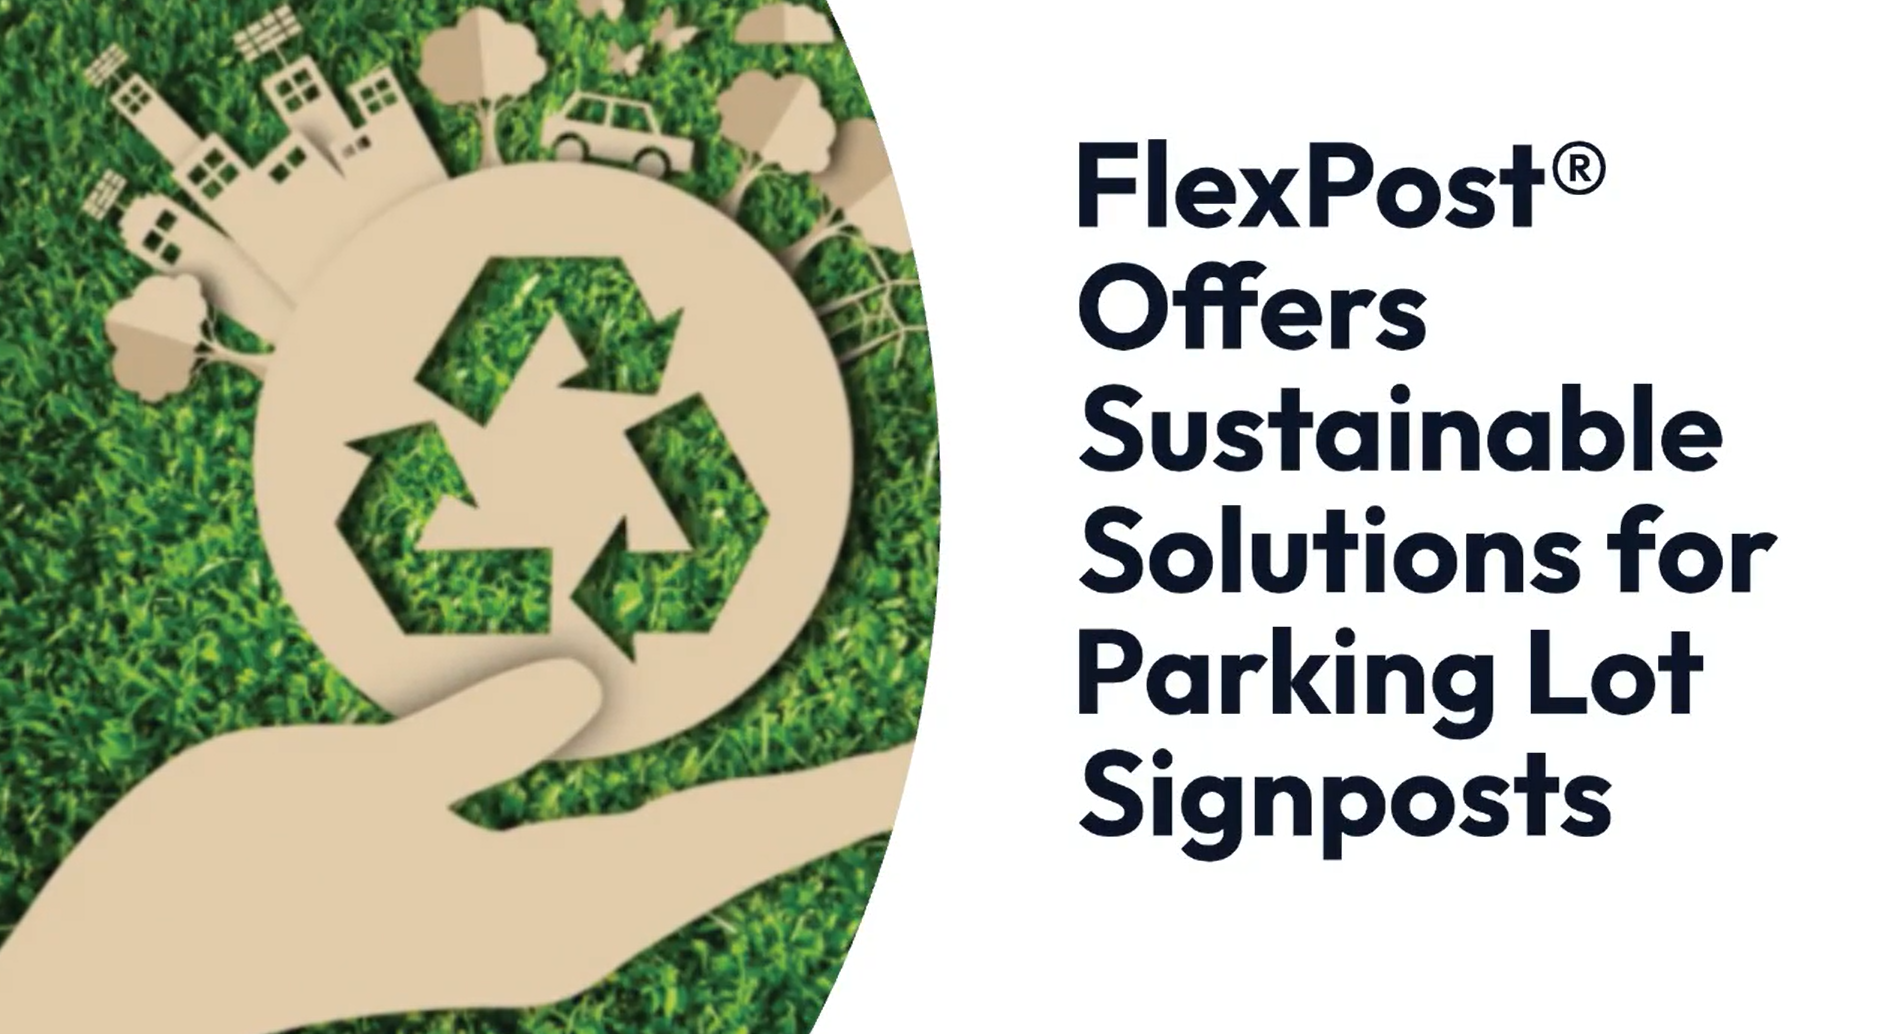 FlexPost Offers Sustainable Solutions for Parking Lot Signposts